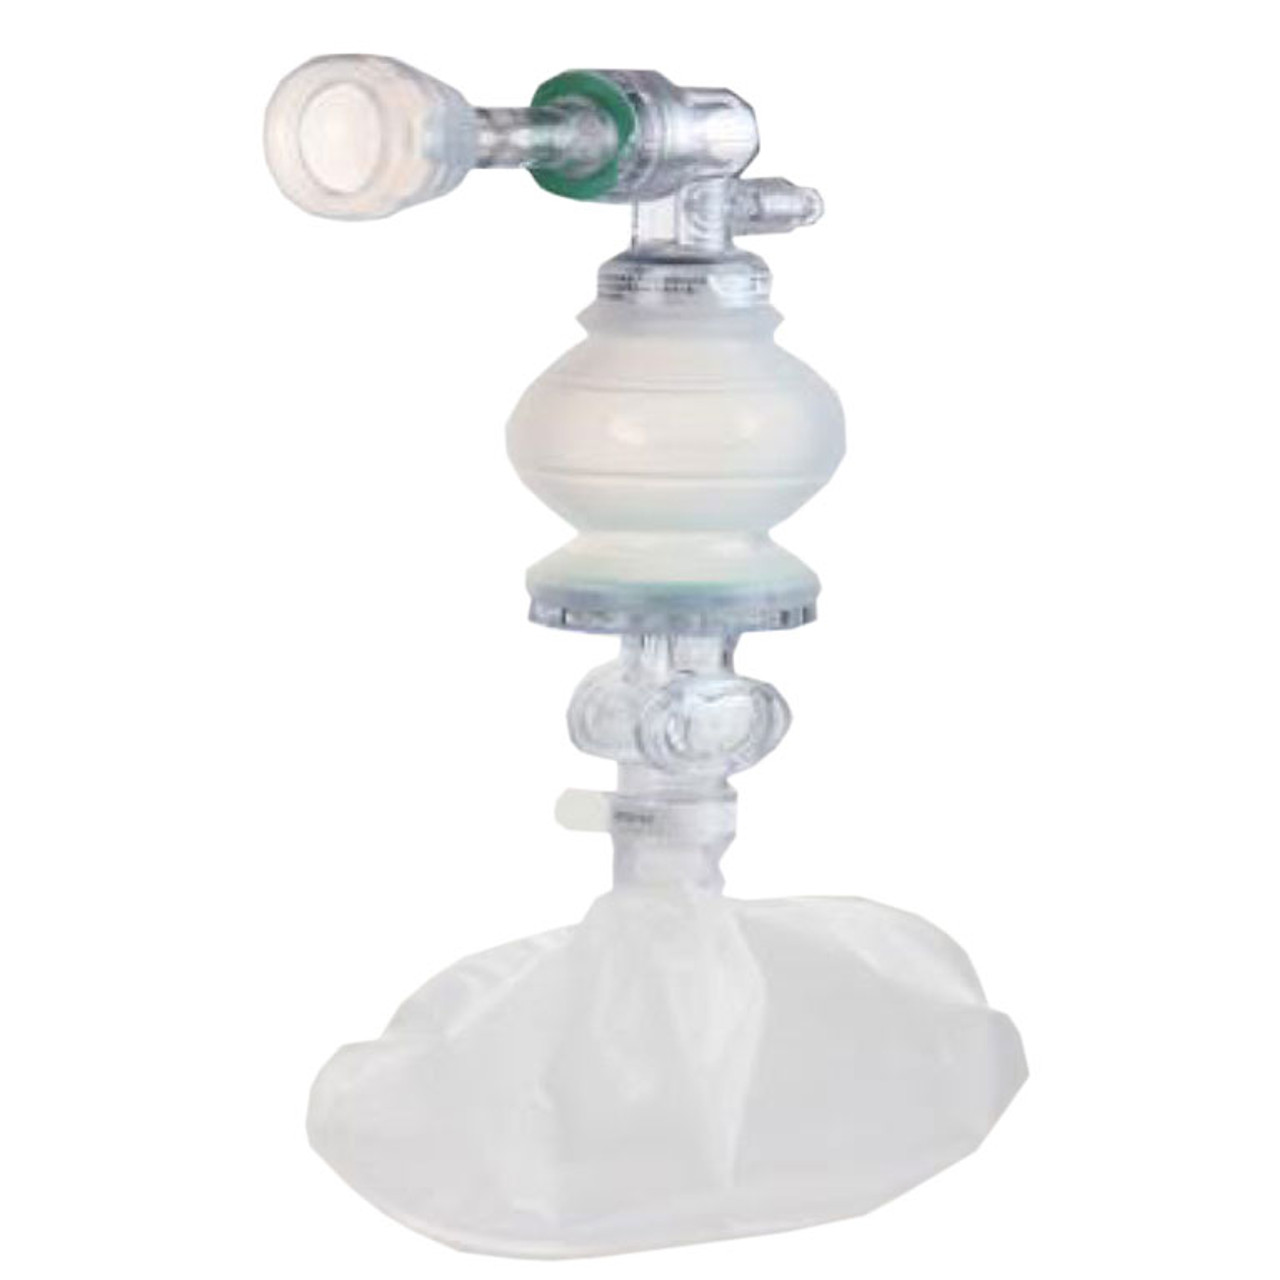 Hospitime Silicone Ambu Bag Type Manual Resuscitator for Infants (Neonatal)  Capacity 240ml (0.24L) with Face Mask Size 0, Color may vary : Amazon.in:  Health & Personal Care